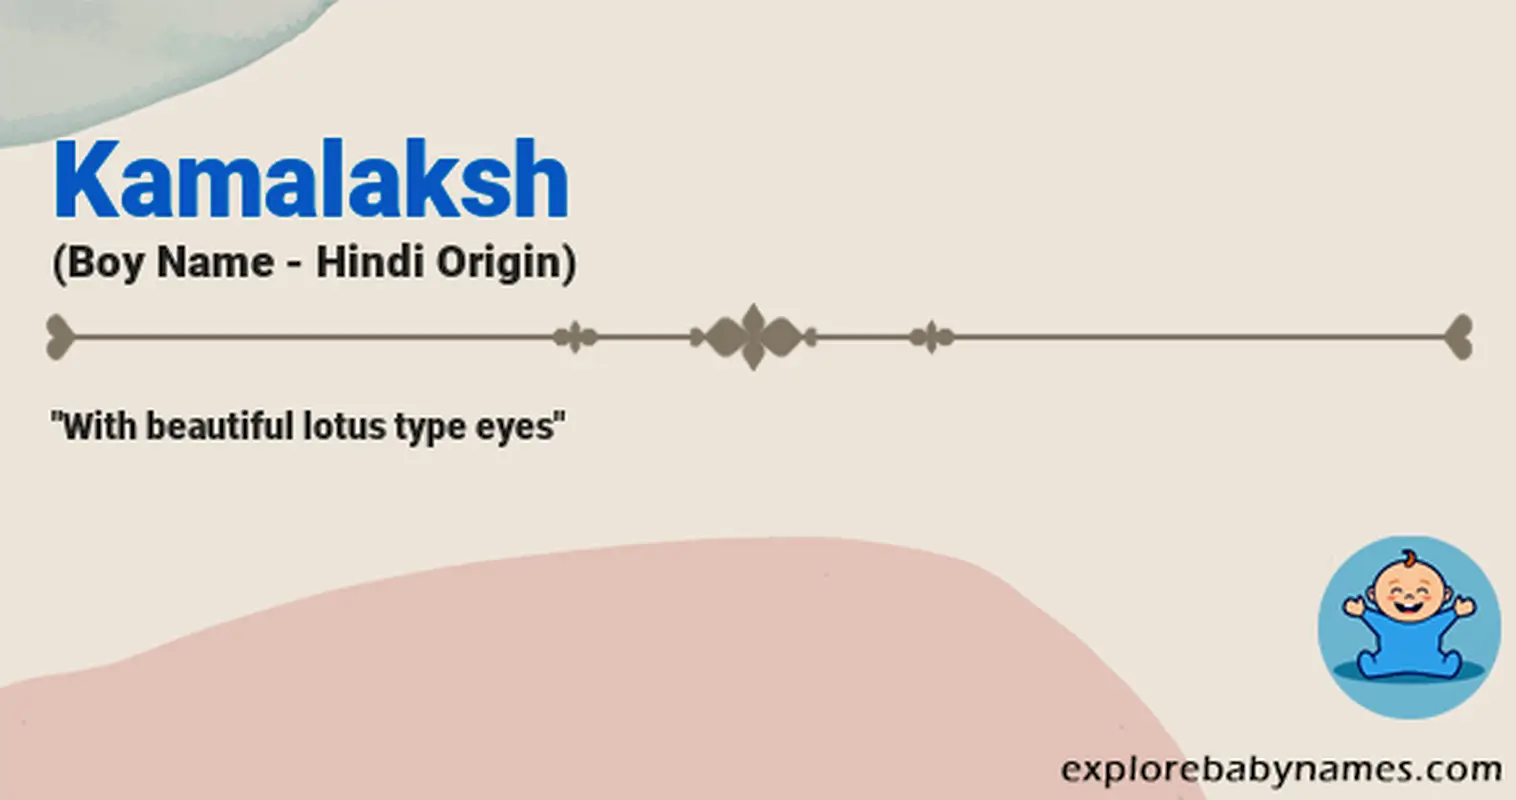 Meaning of Kamalaksh